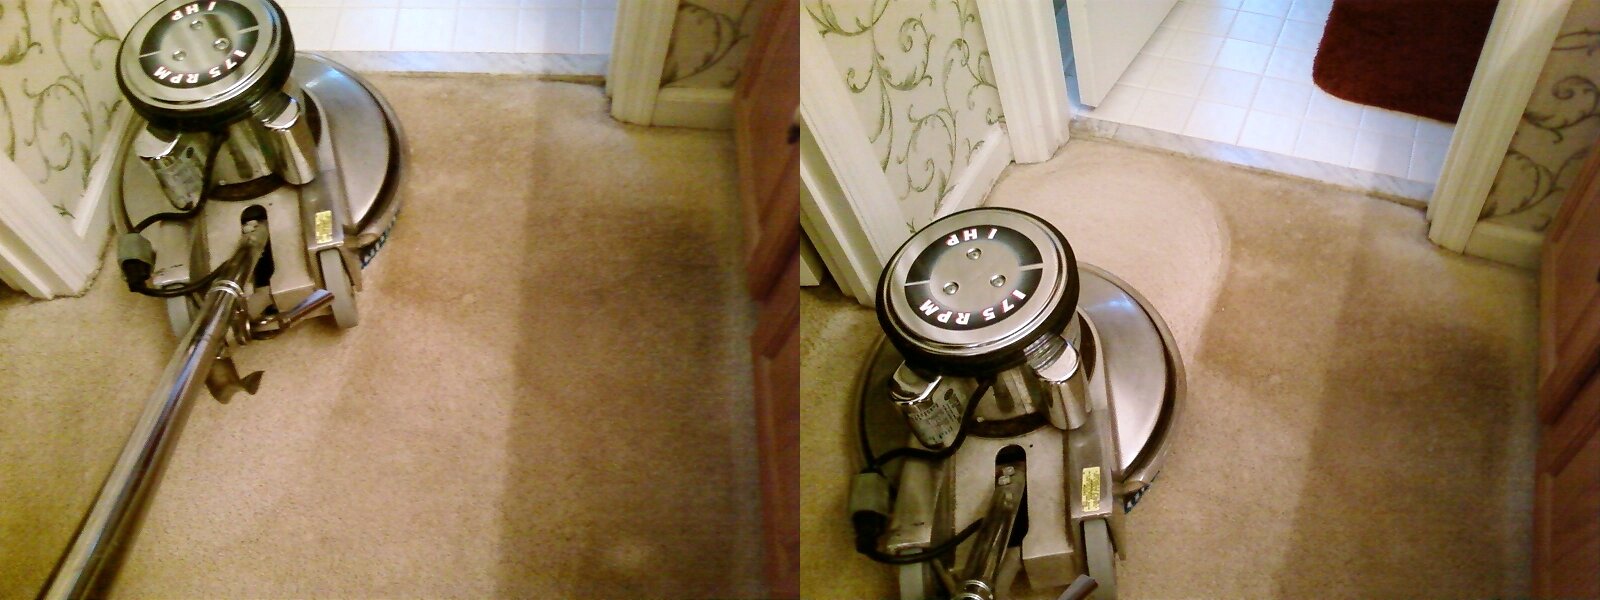 We use top-of-the-line equipment for your carpet cleaning.